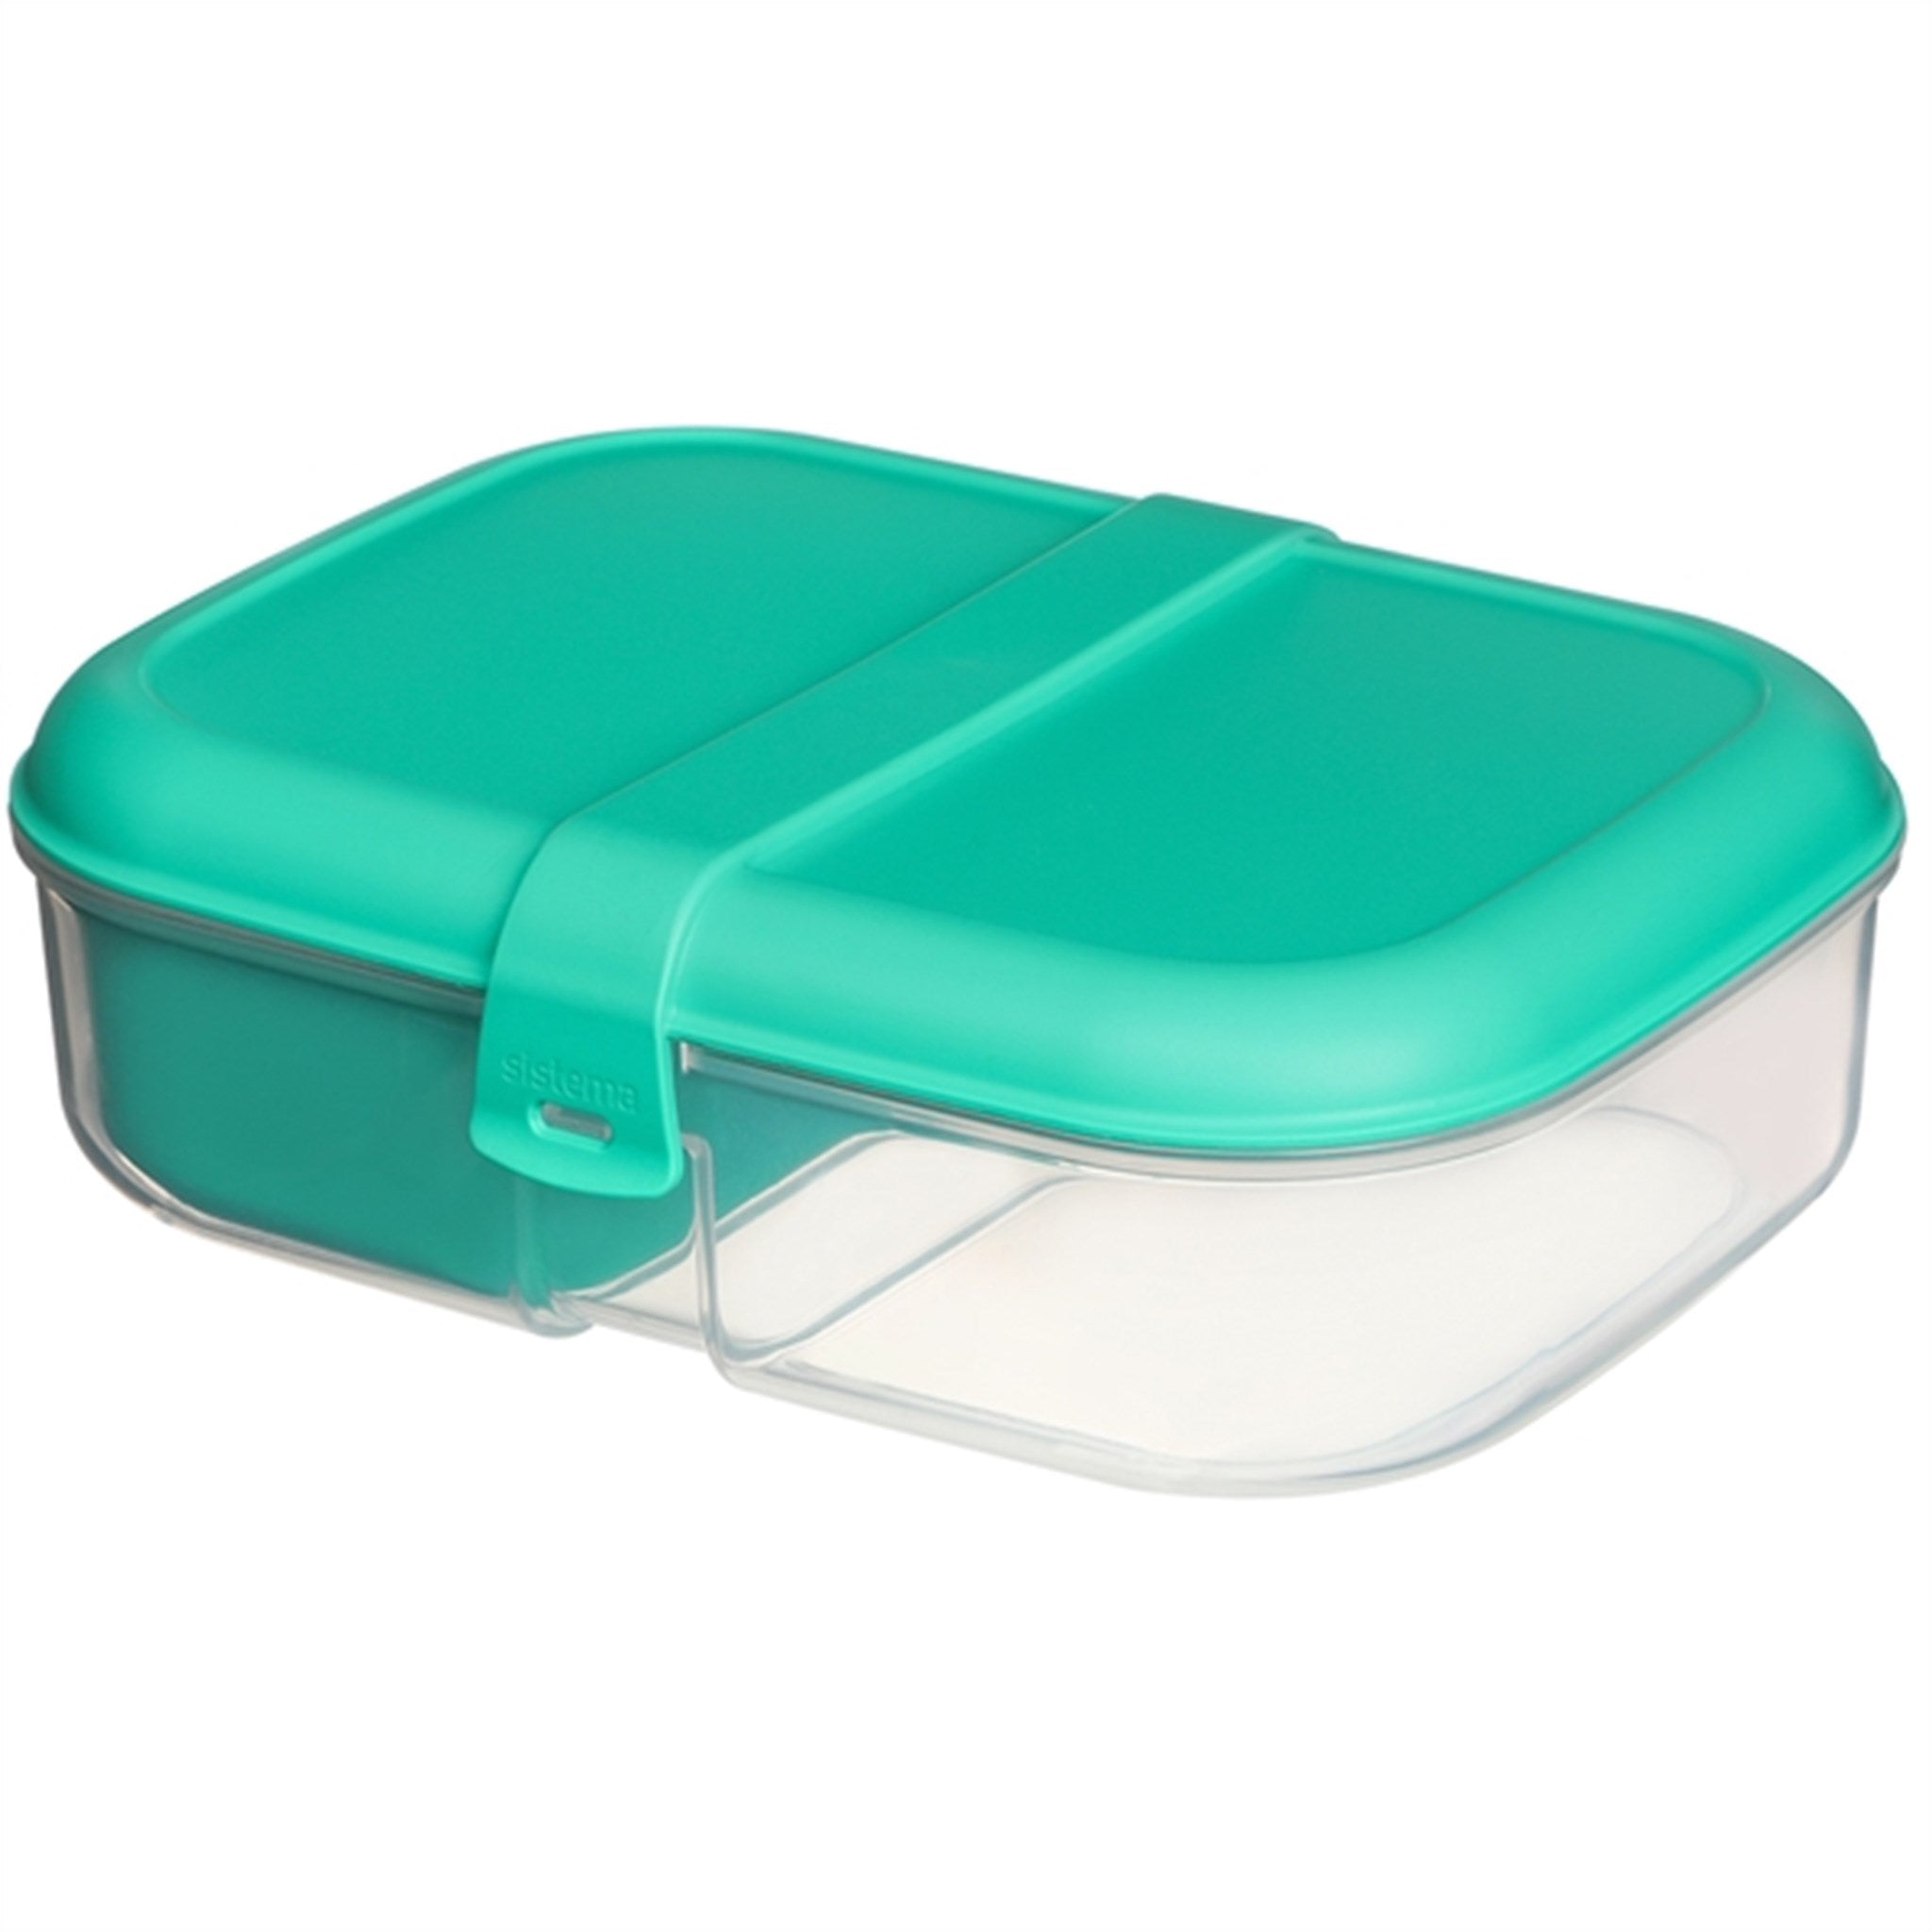 Sistema To Go Ribbon Lunch Box 1,1 L Minty Teal